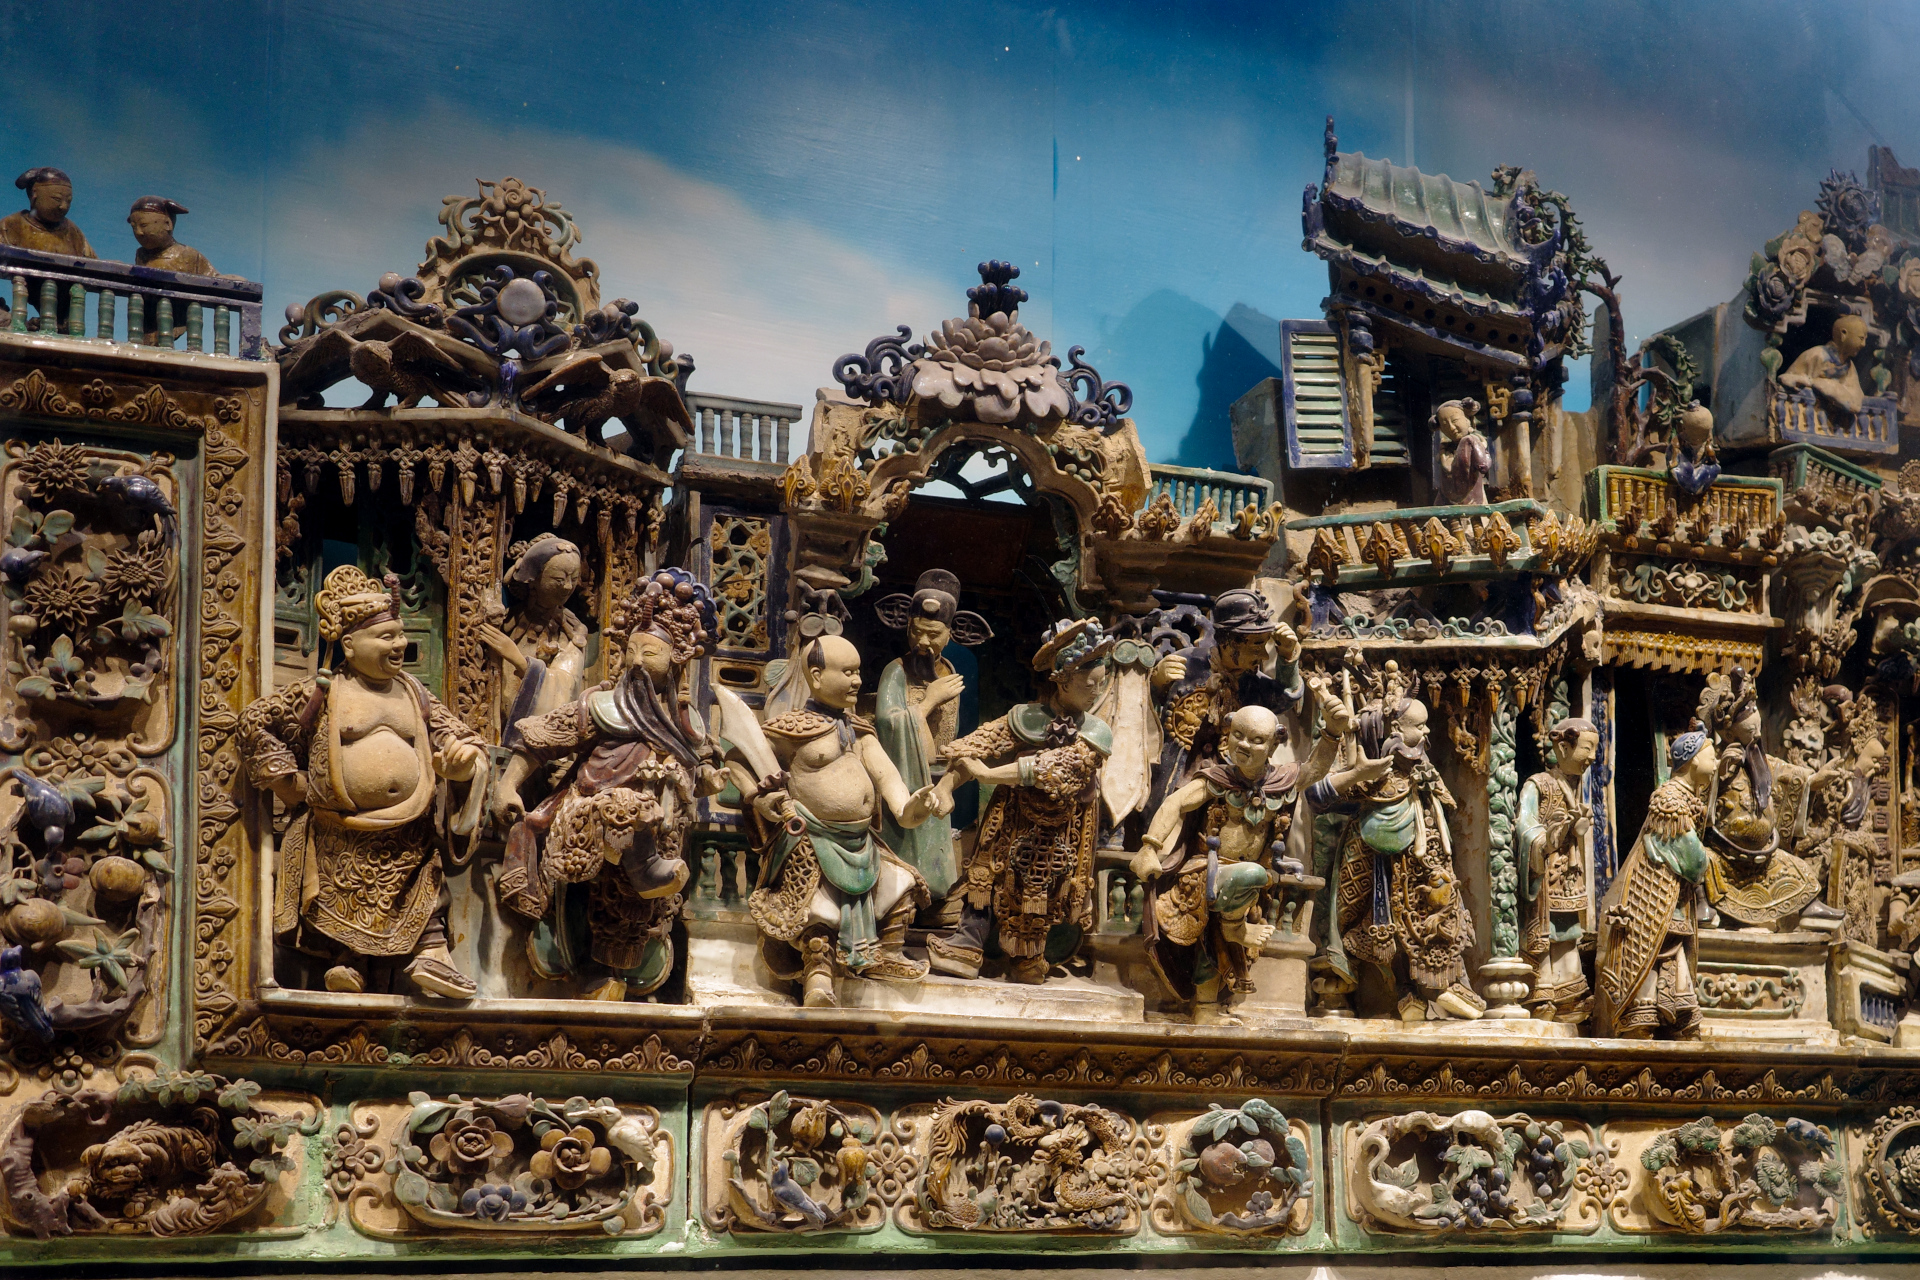 A wall of intricately carved figurines